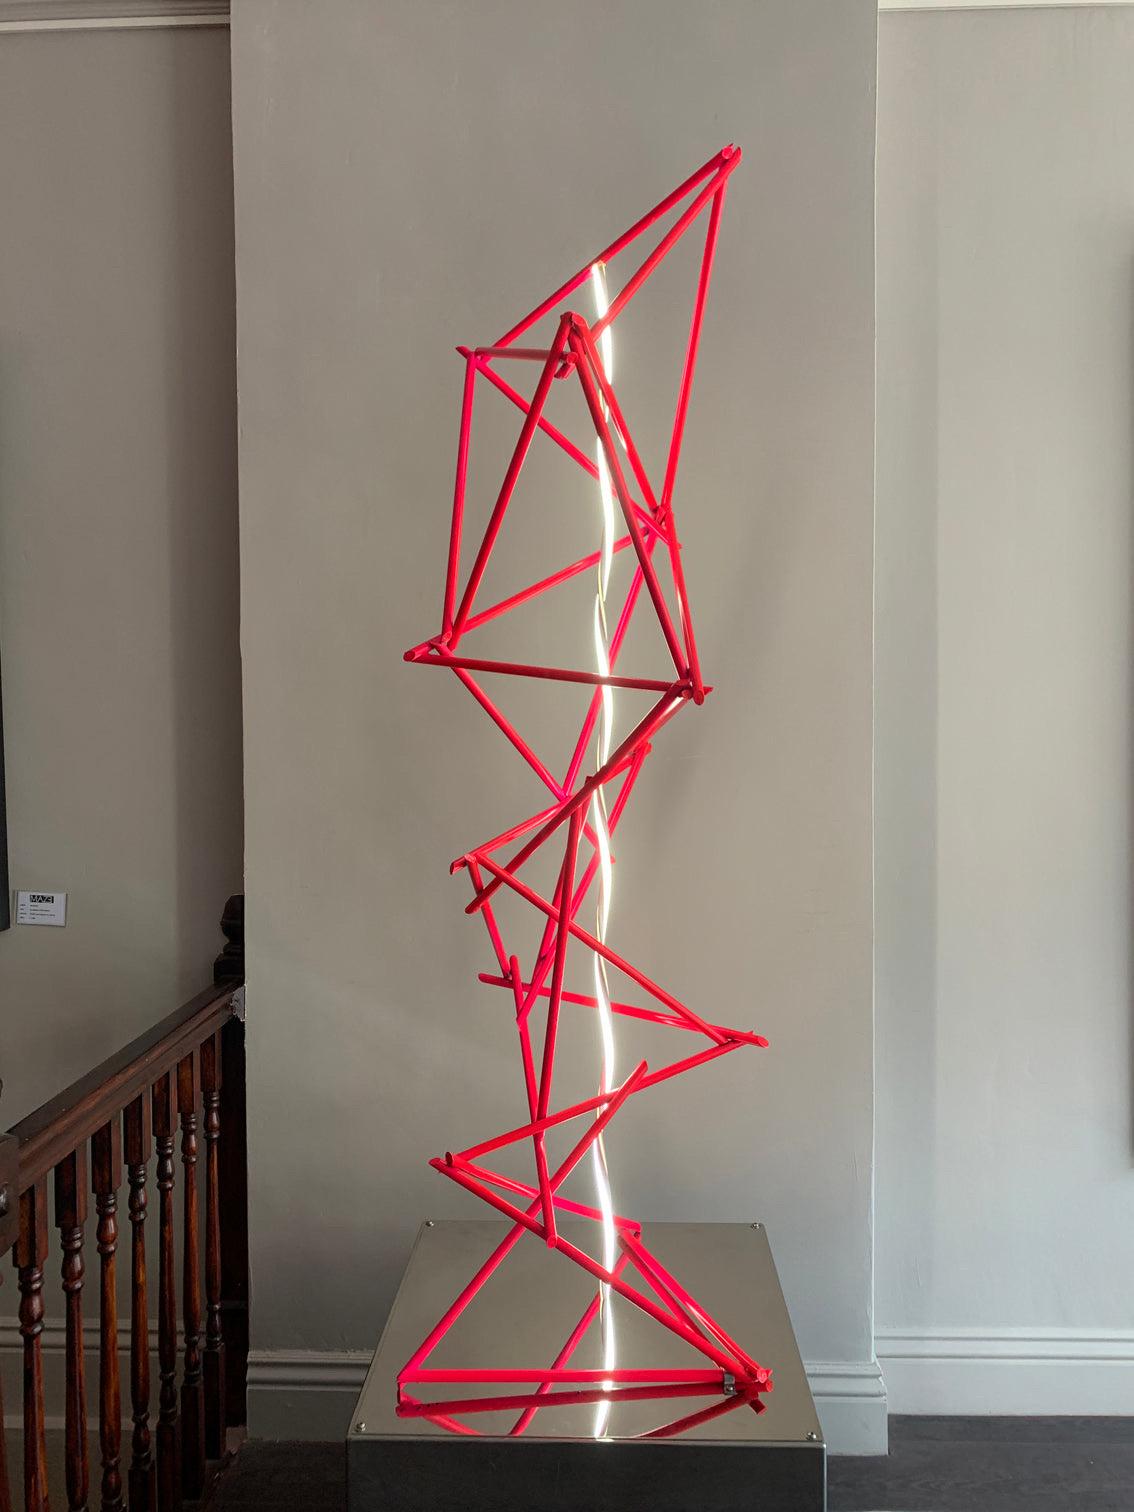 Mark Beattie, Fracture

Painted copper & LED rope light on mirror polished stainless steel plinth

Unique artwork 

60 x 60 x 225 cm (23.62 x 23.62 x 88.58 in) 